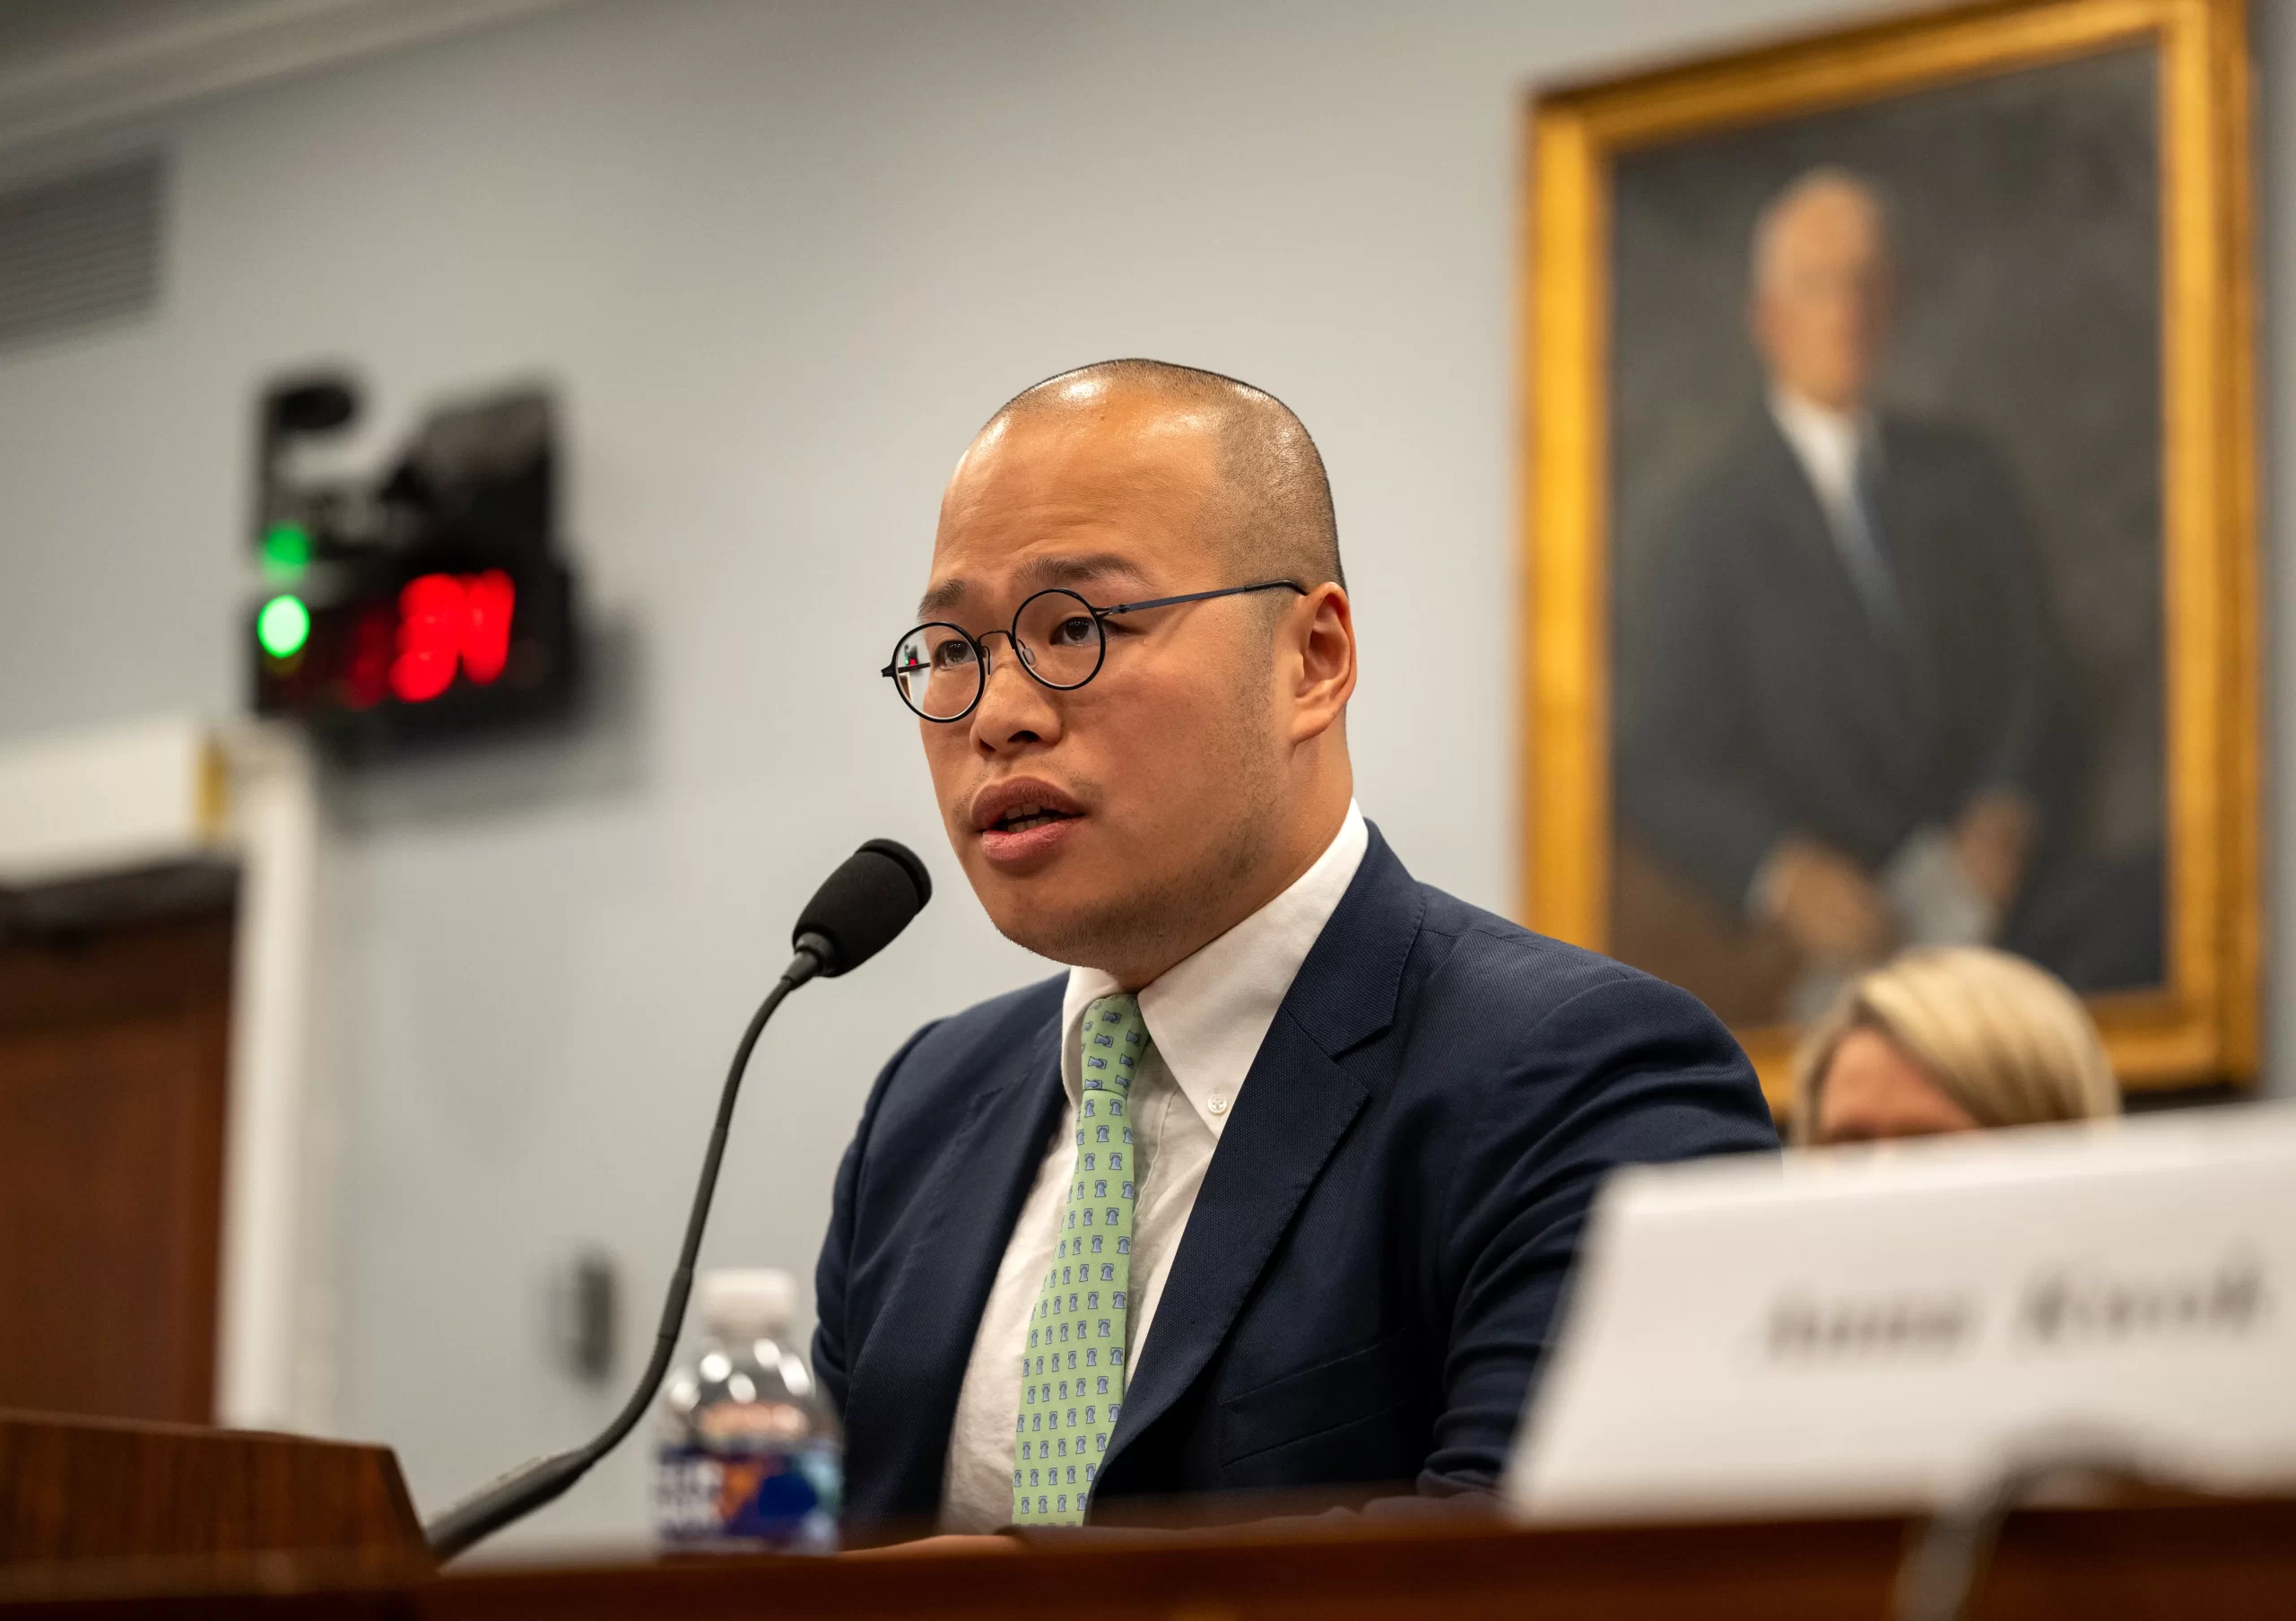 Sebastien Lai, son of political prisoner Jimmy Lai, testified at a hearing on May 11, 2023, headed by Rep. Chris Smith. Courtesy of the office of Rep. Chris Smith